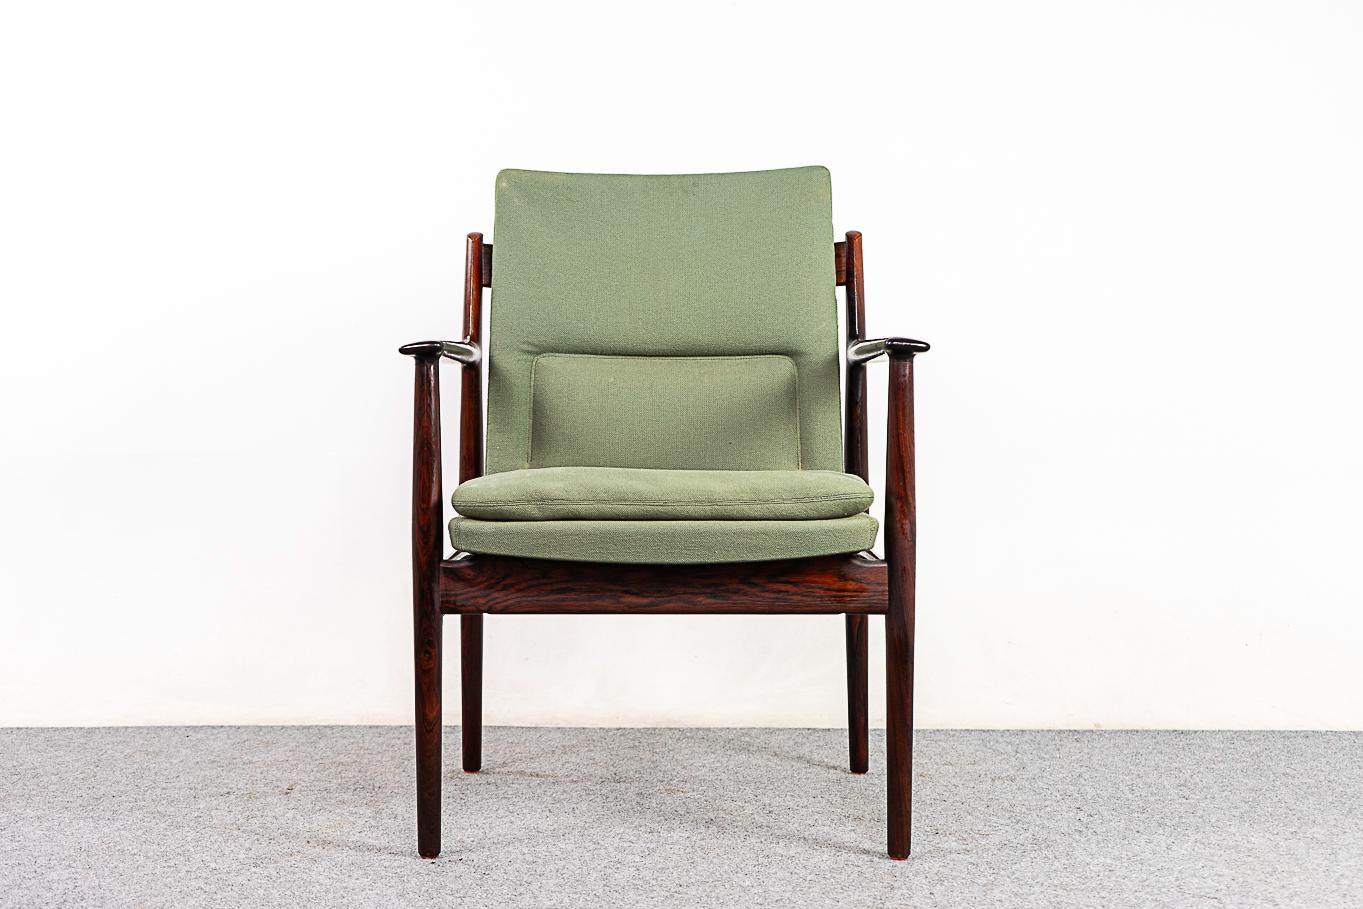 Rosewood lounge chair by Arne Vodder for Sibast, circa 1960's. Stunning sculpted rosewood frame with beautiful joinery and an elegant profile. Original upholstery with significant wear, foam requires immediate replacement. Quality designer piece to